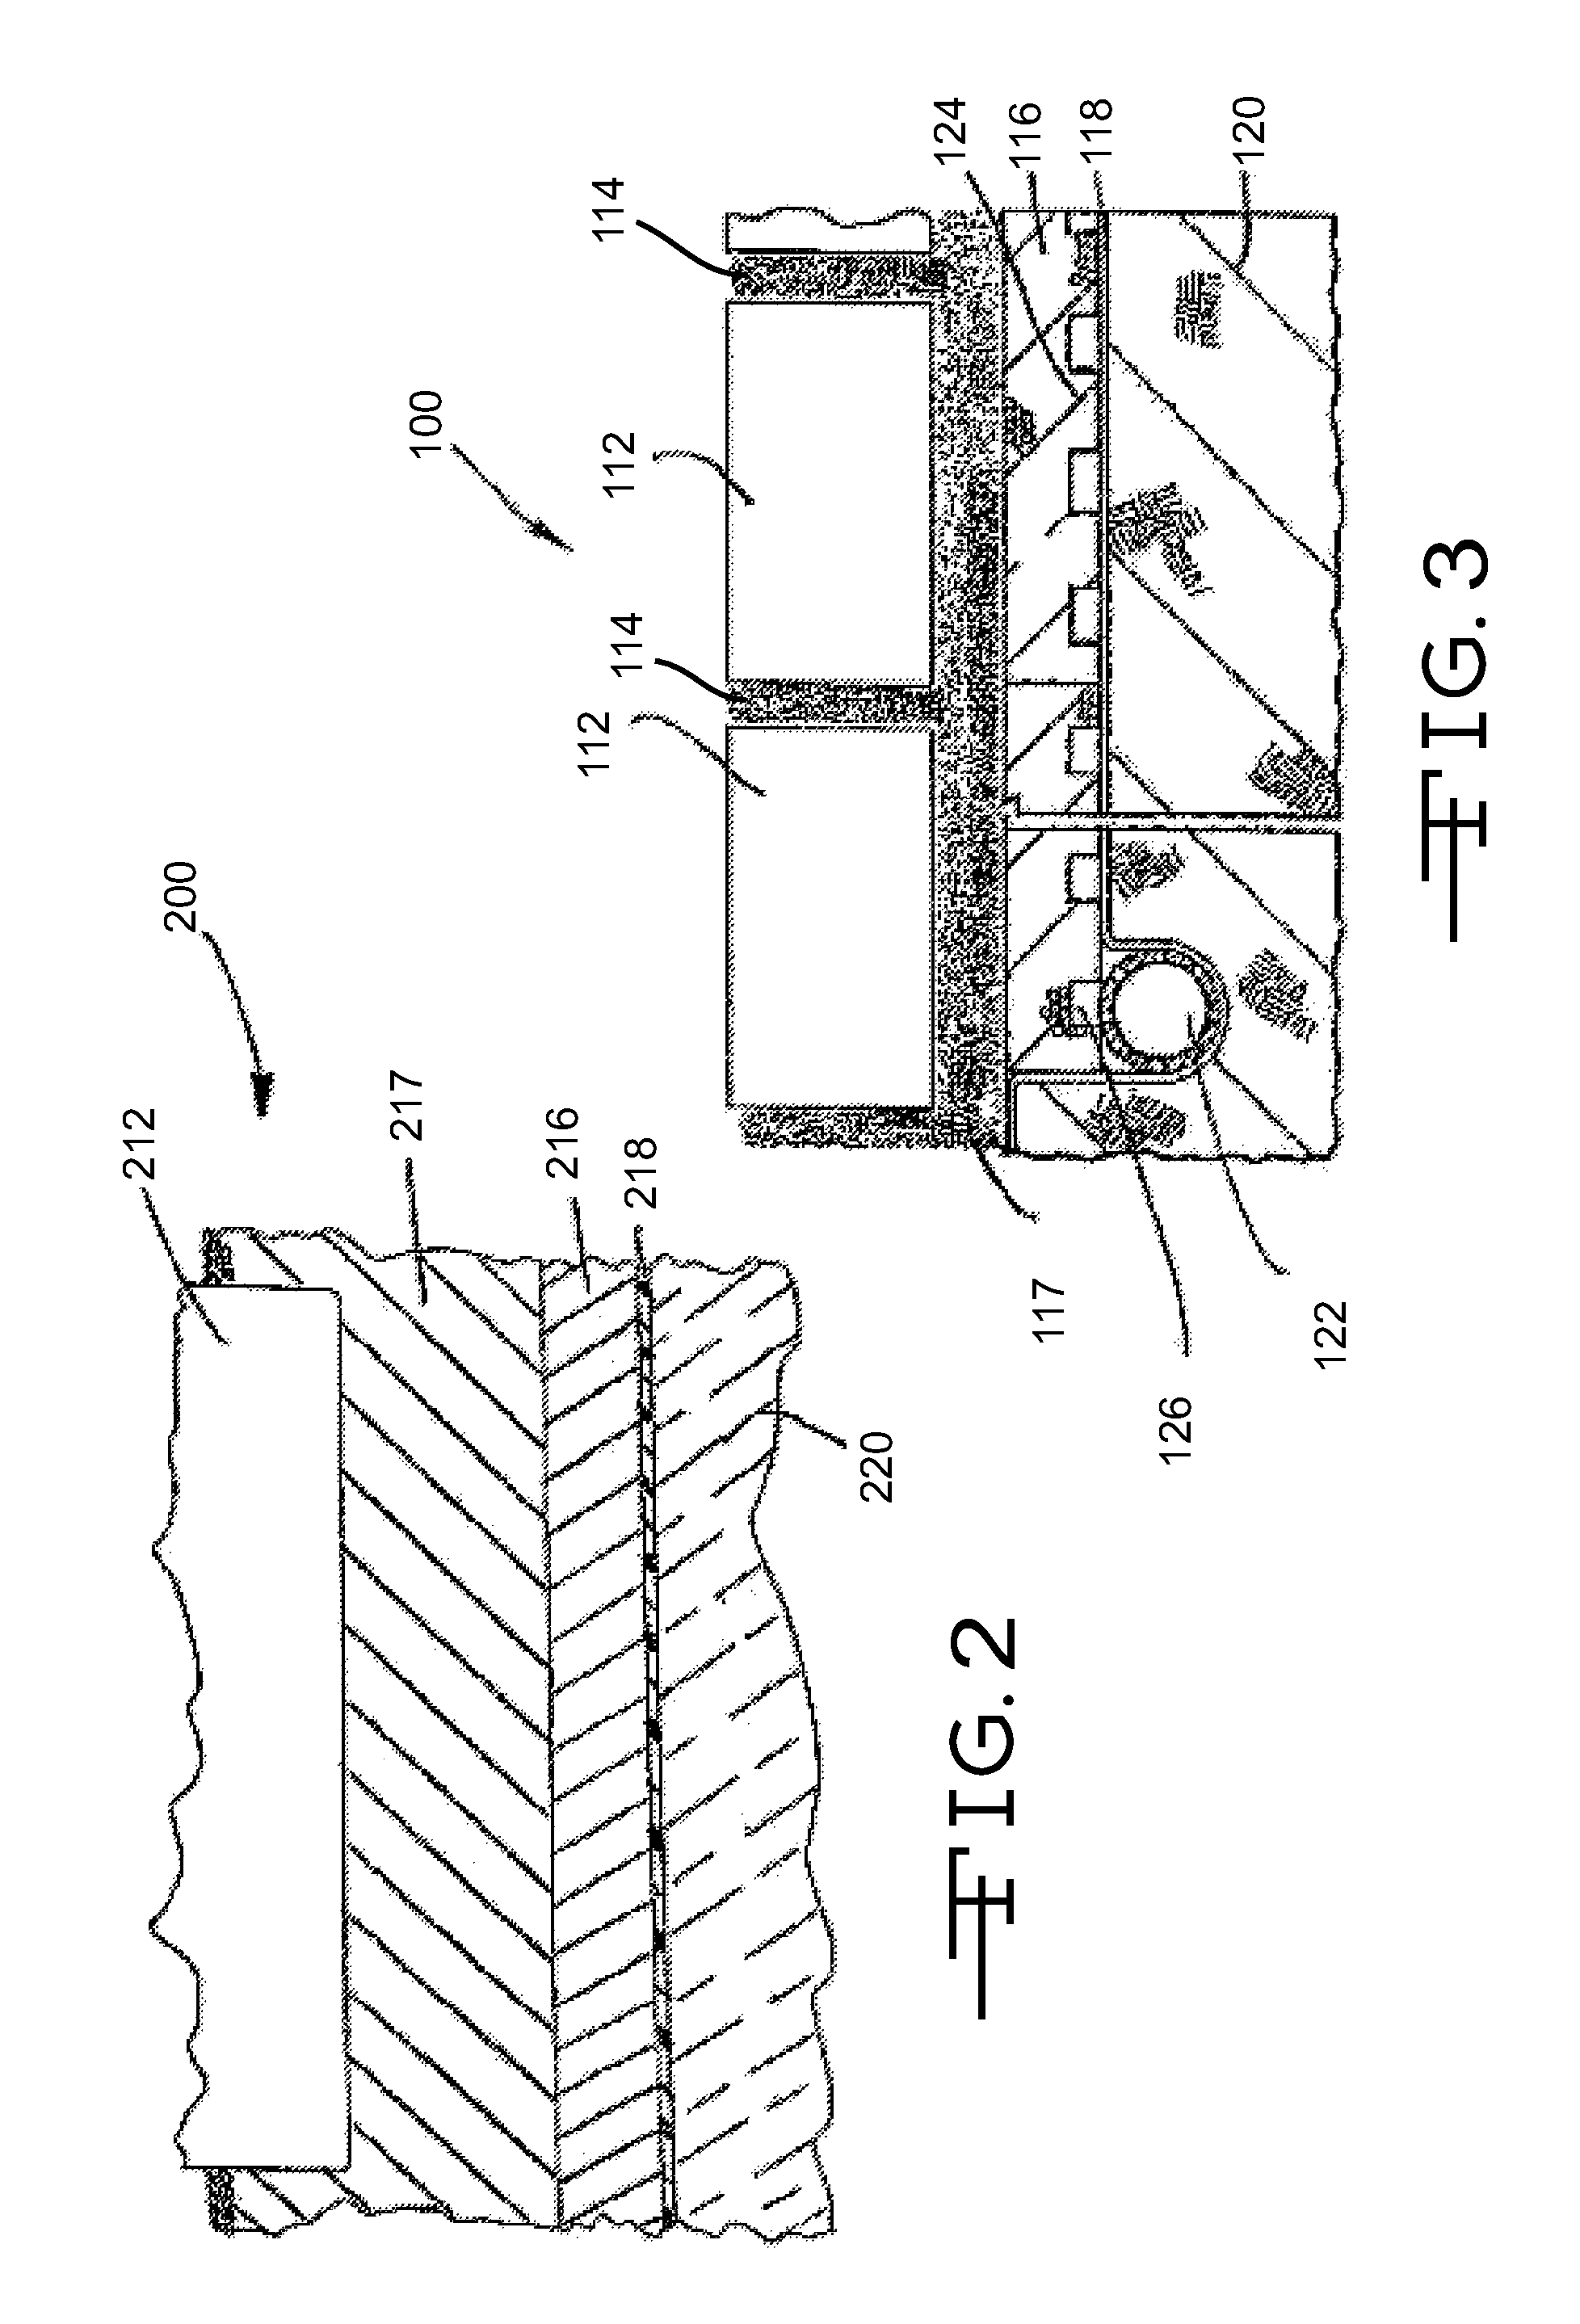 Structural underlayment support system for use with paving and flooring elements